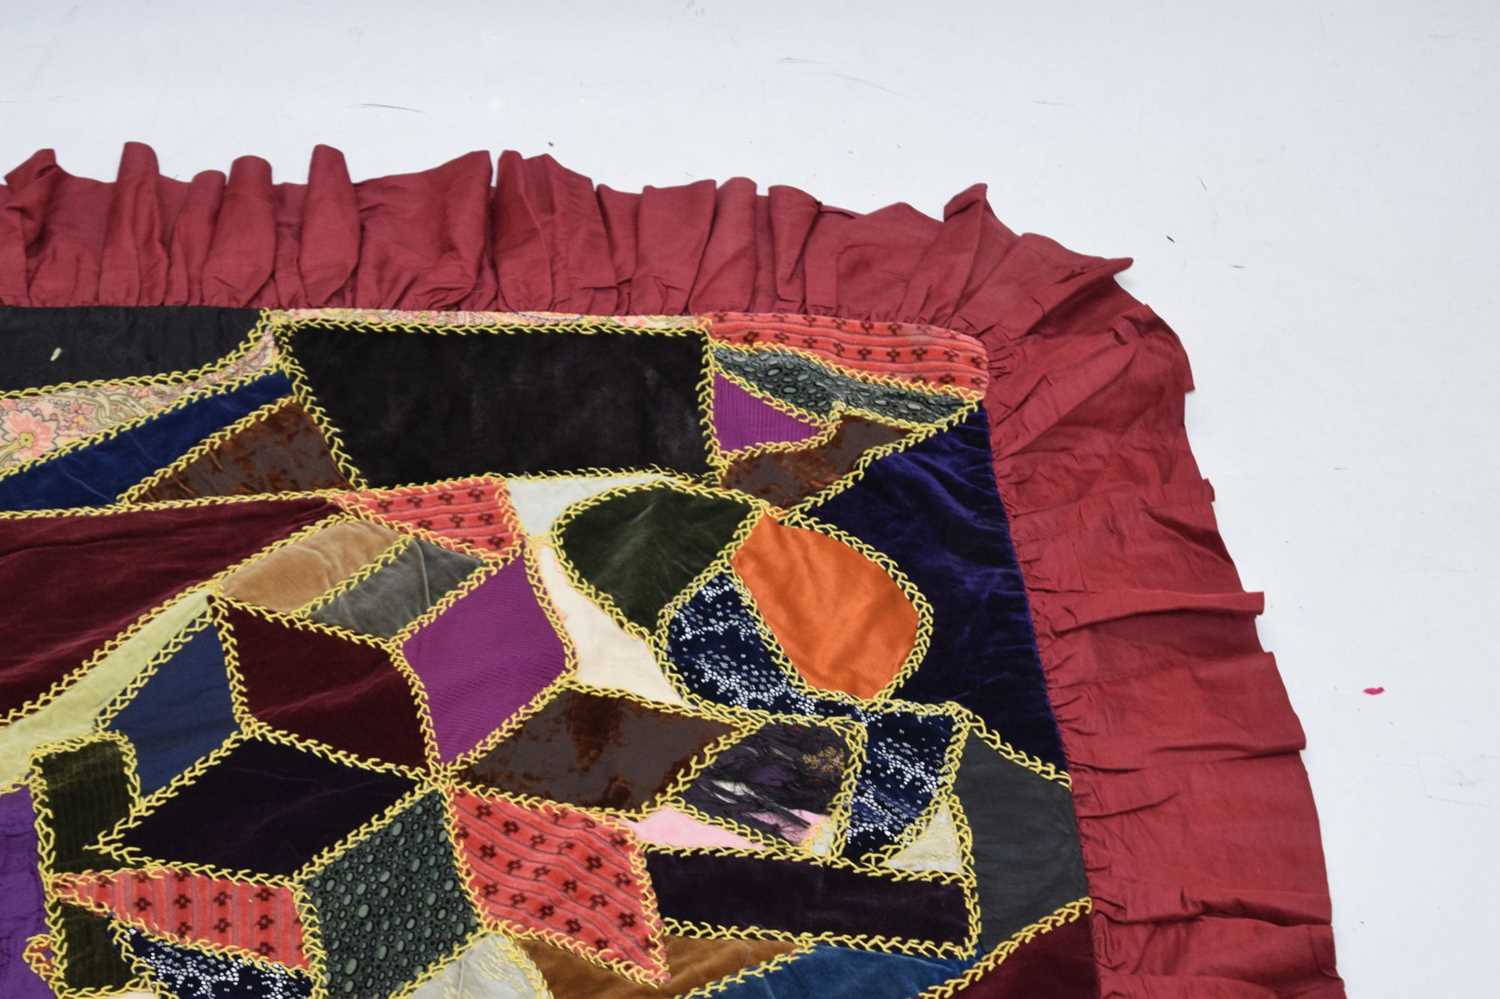 Late 19th/early 20th century patchwork quilt - Image 7 of 8